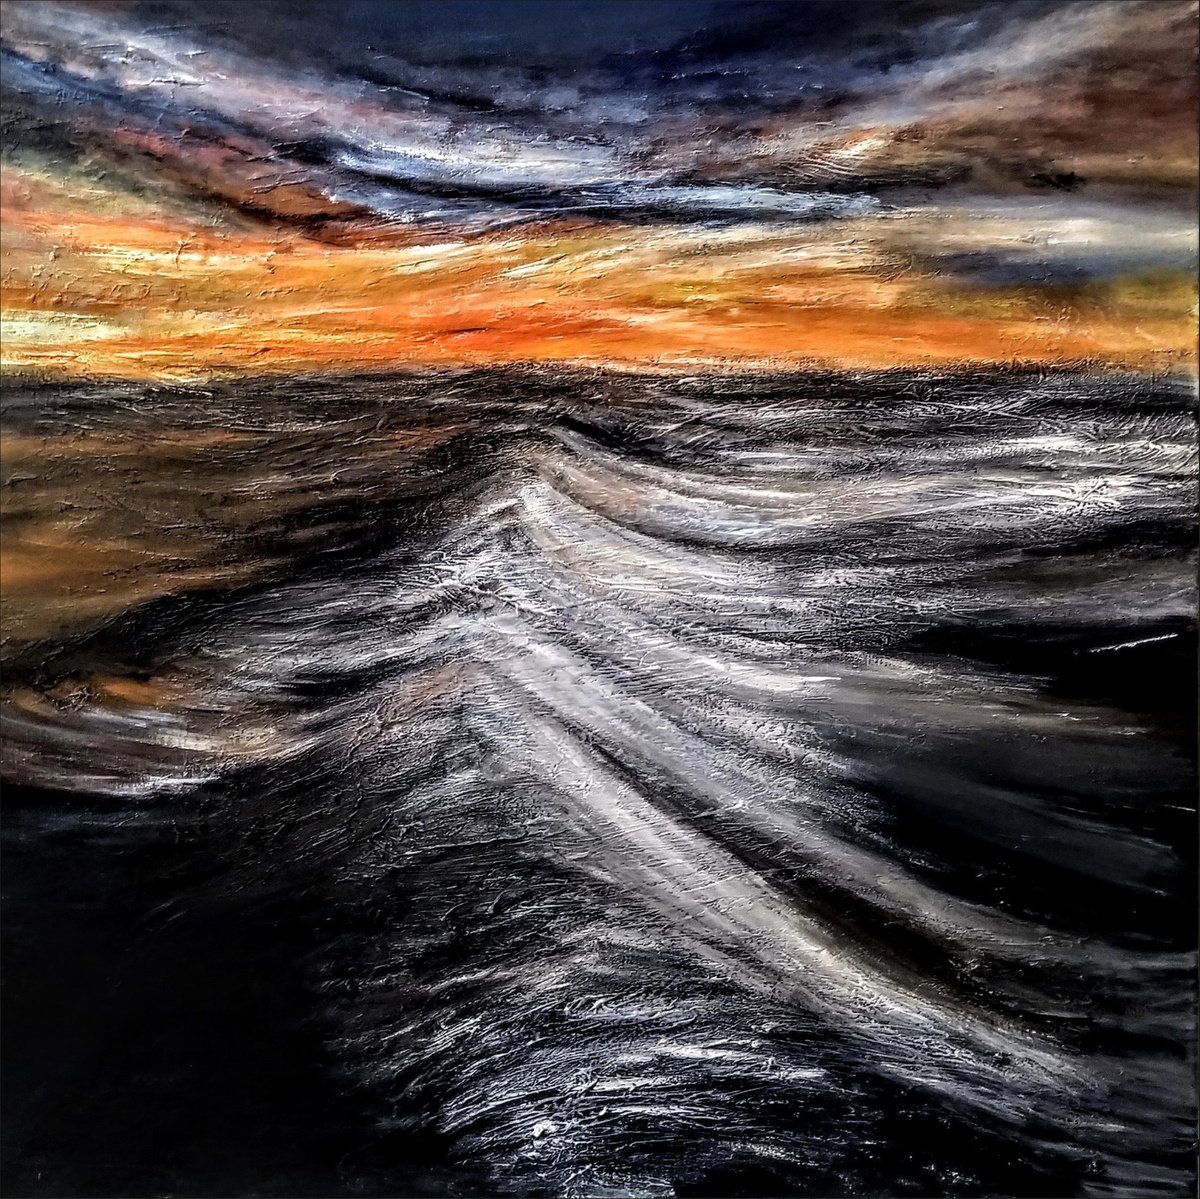 The Baltic Sea 100x100cm Abstract Textured Seascape by Alexandra Petropoulou